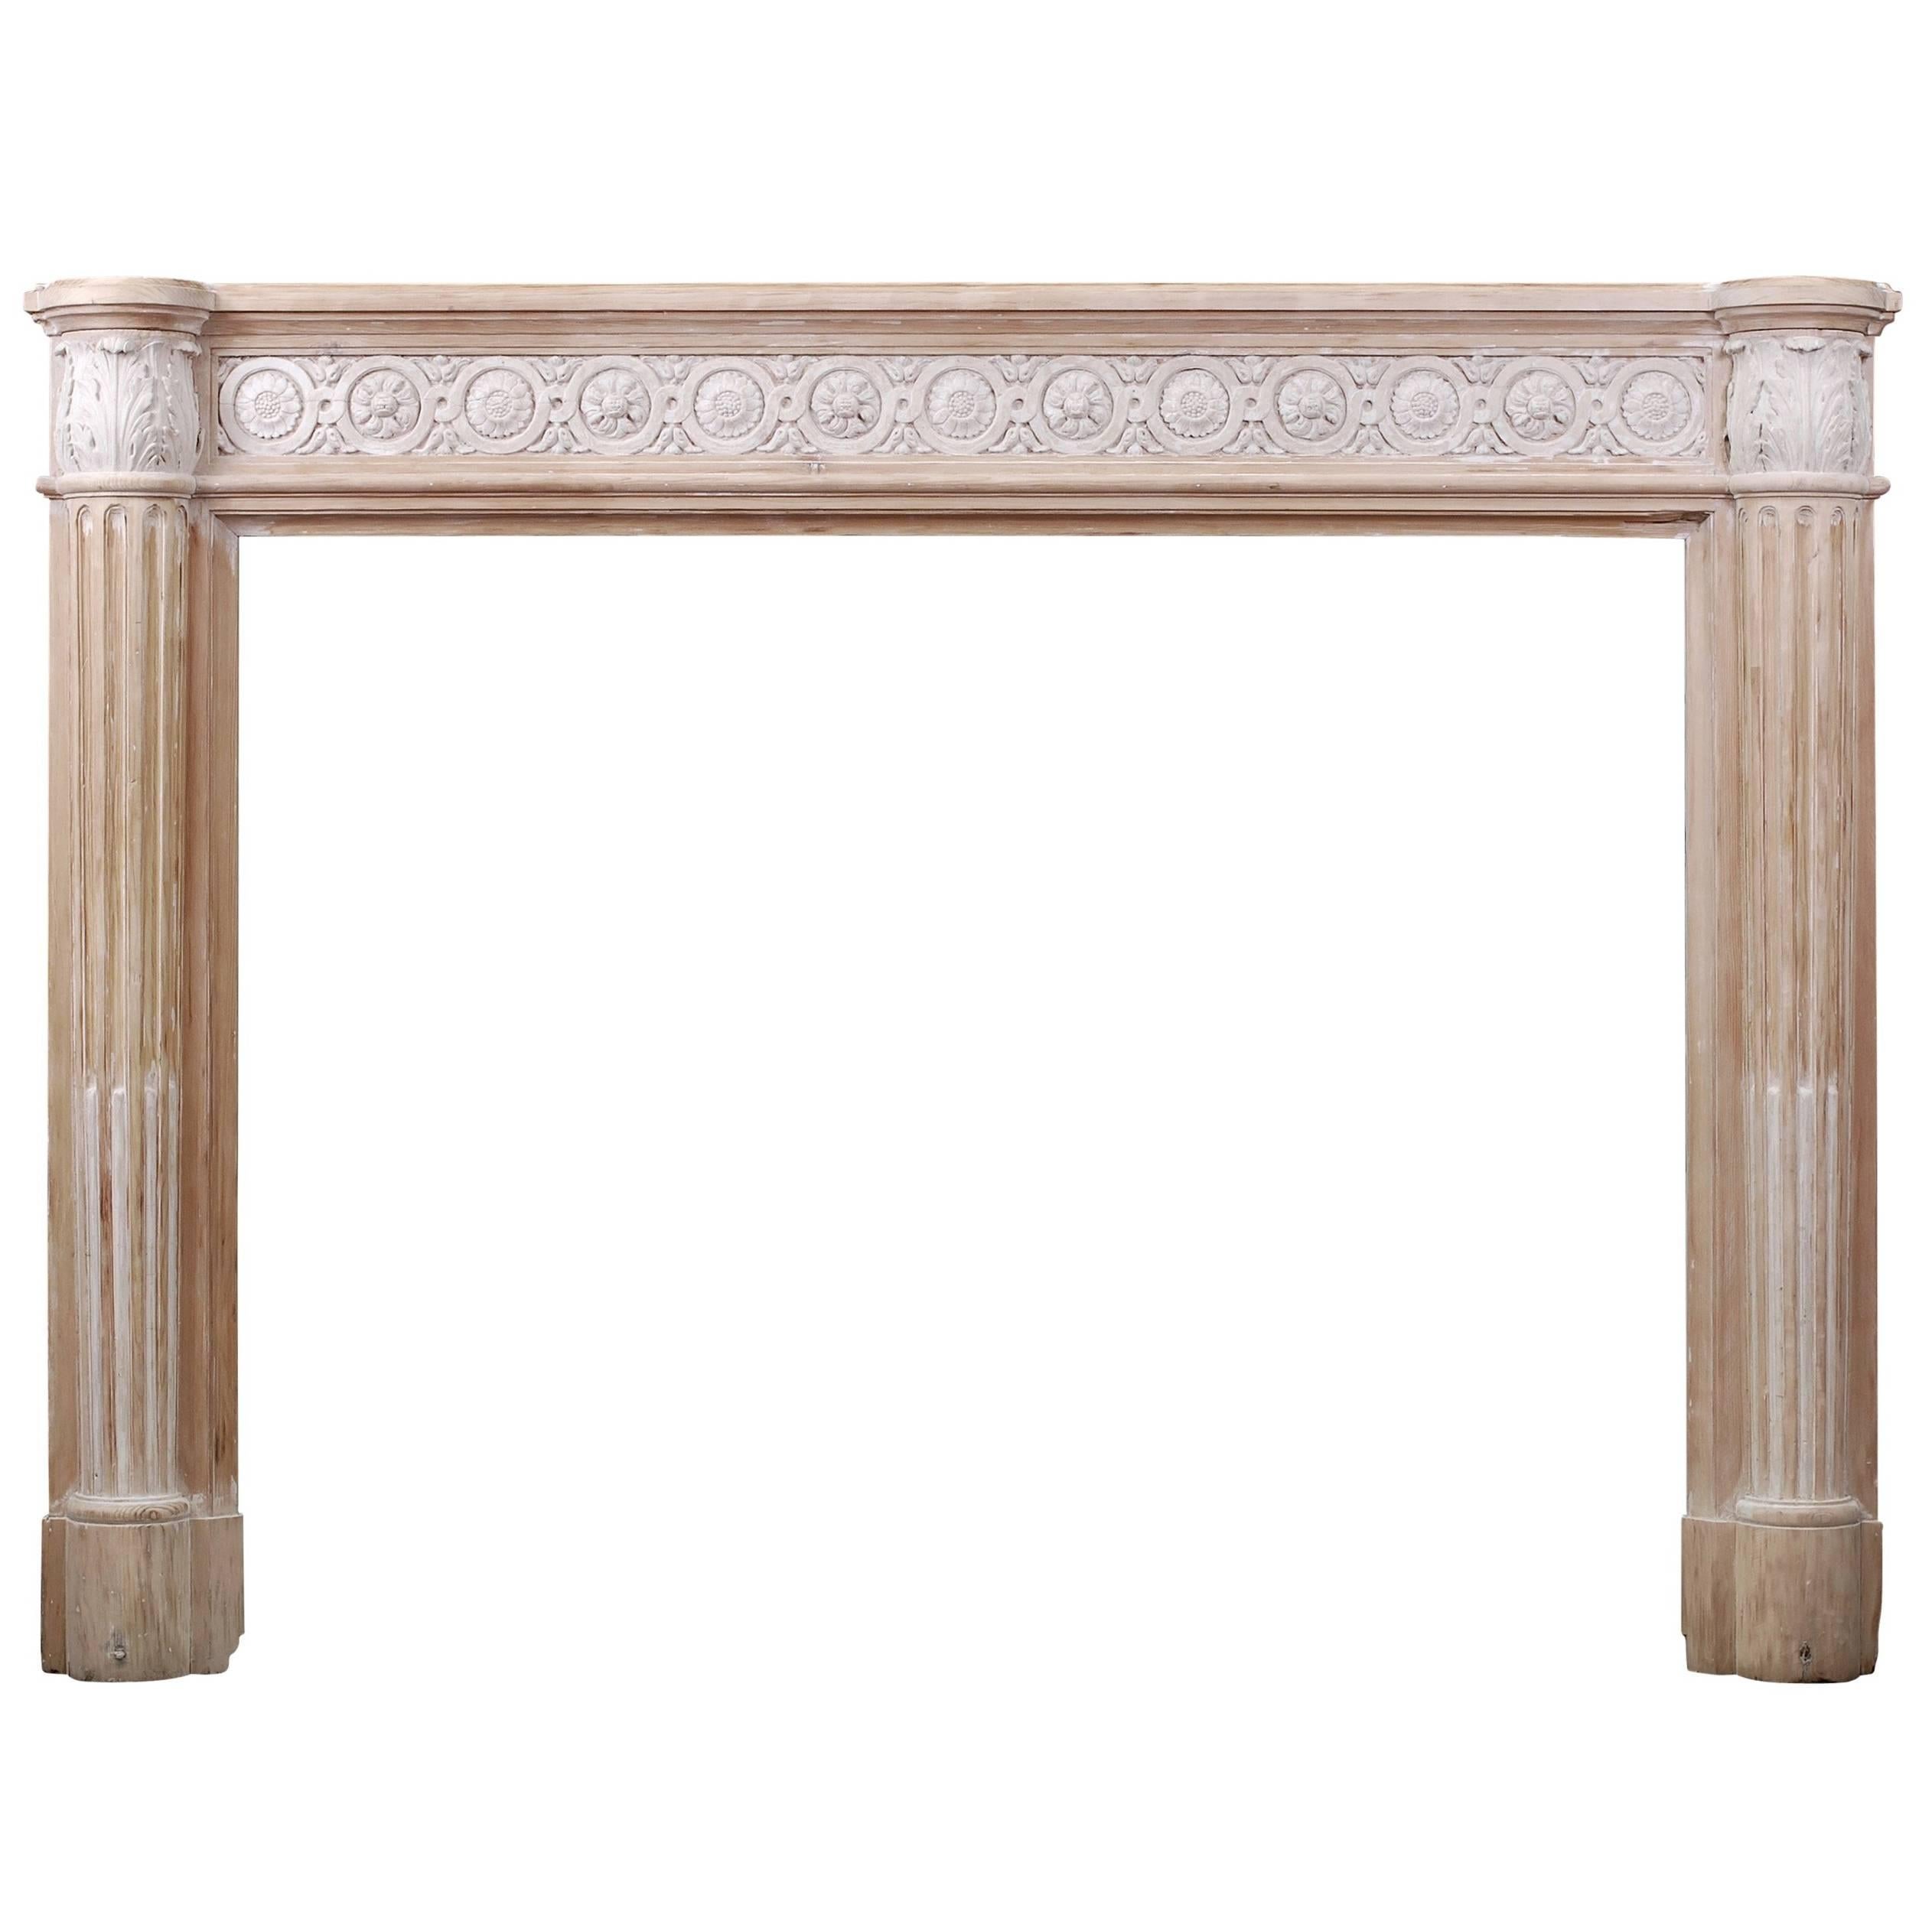 French Louis XVI Style Wood Fireplace with Composition Enrichments